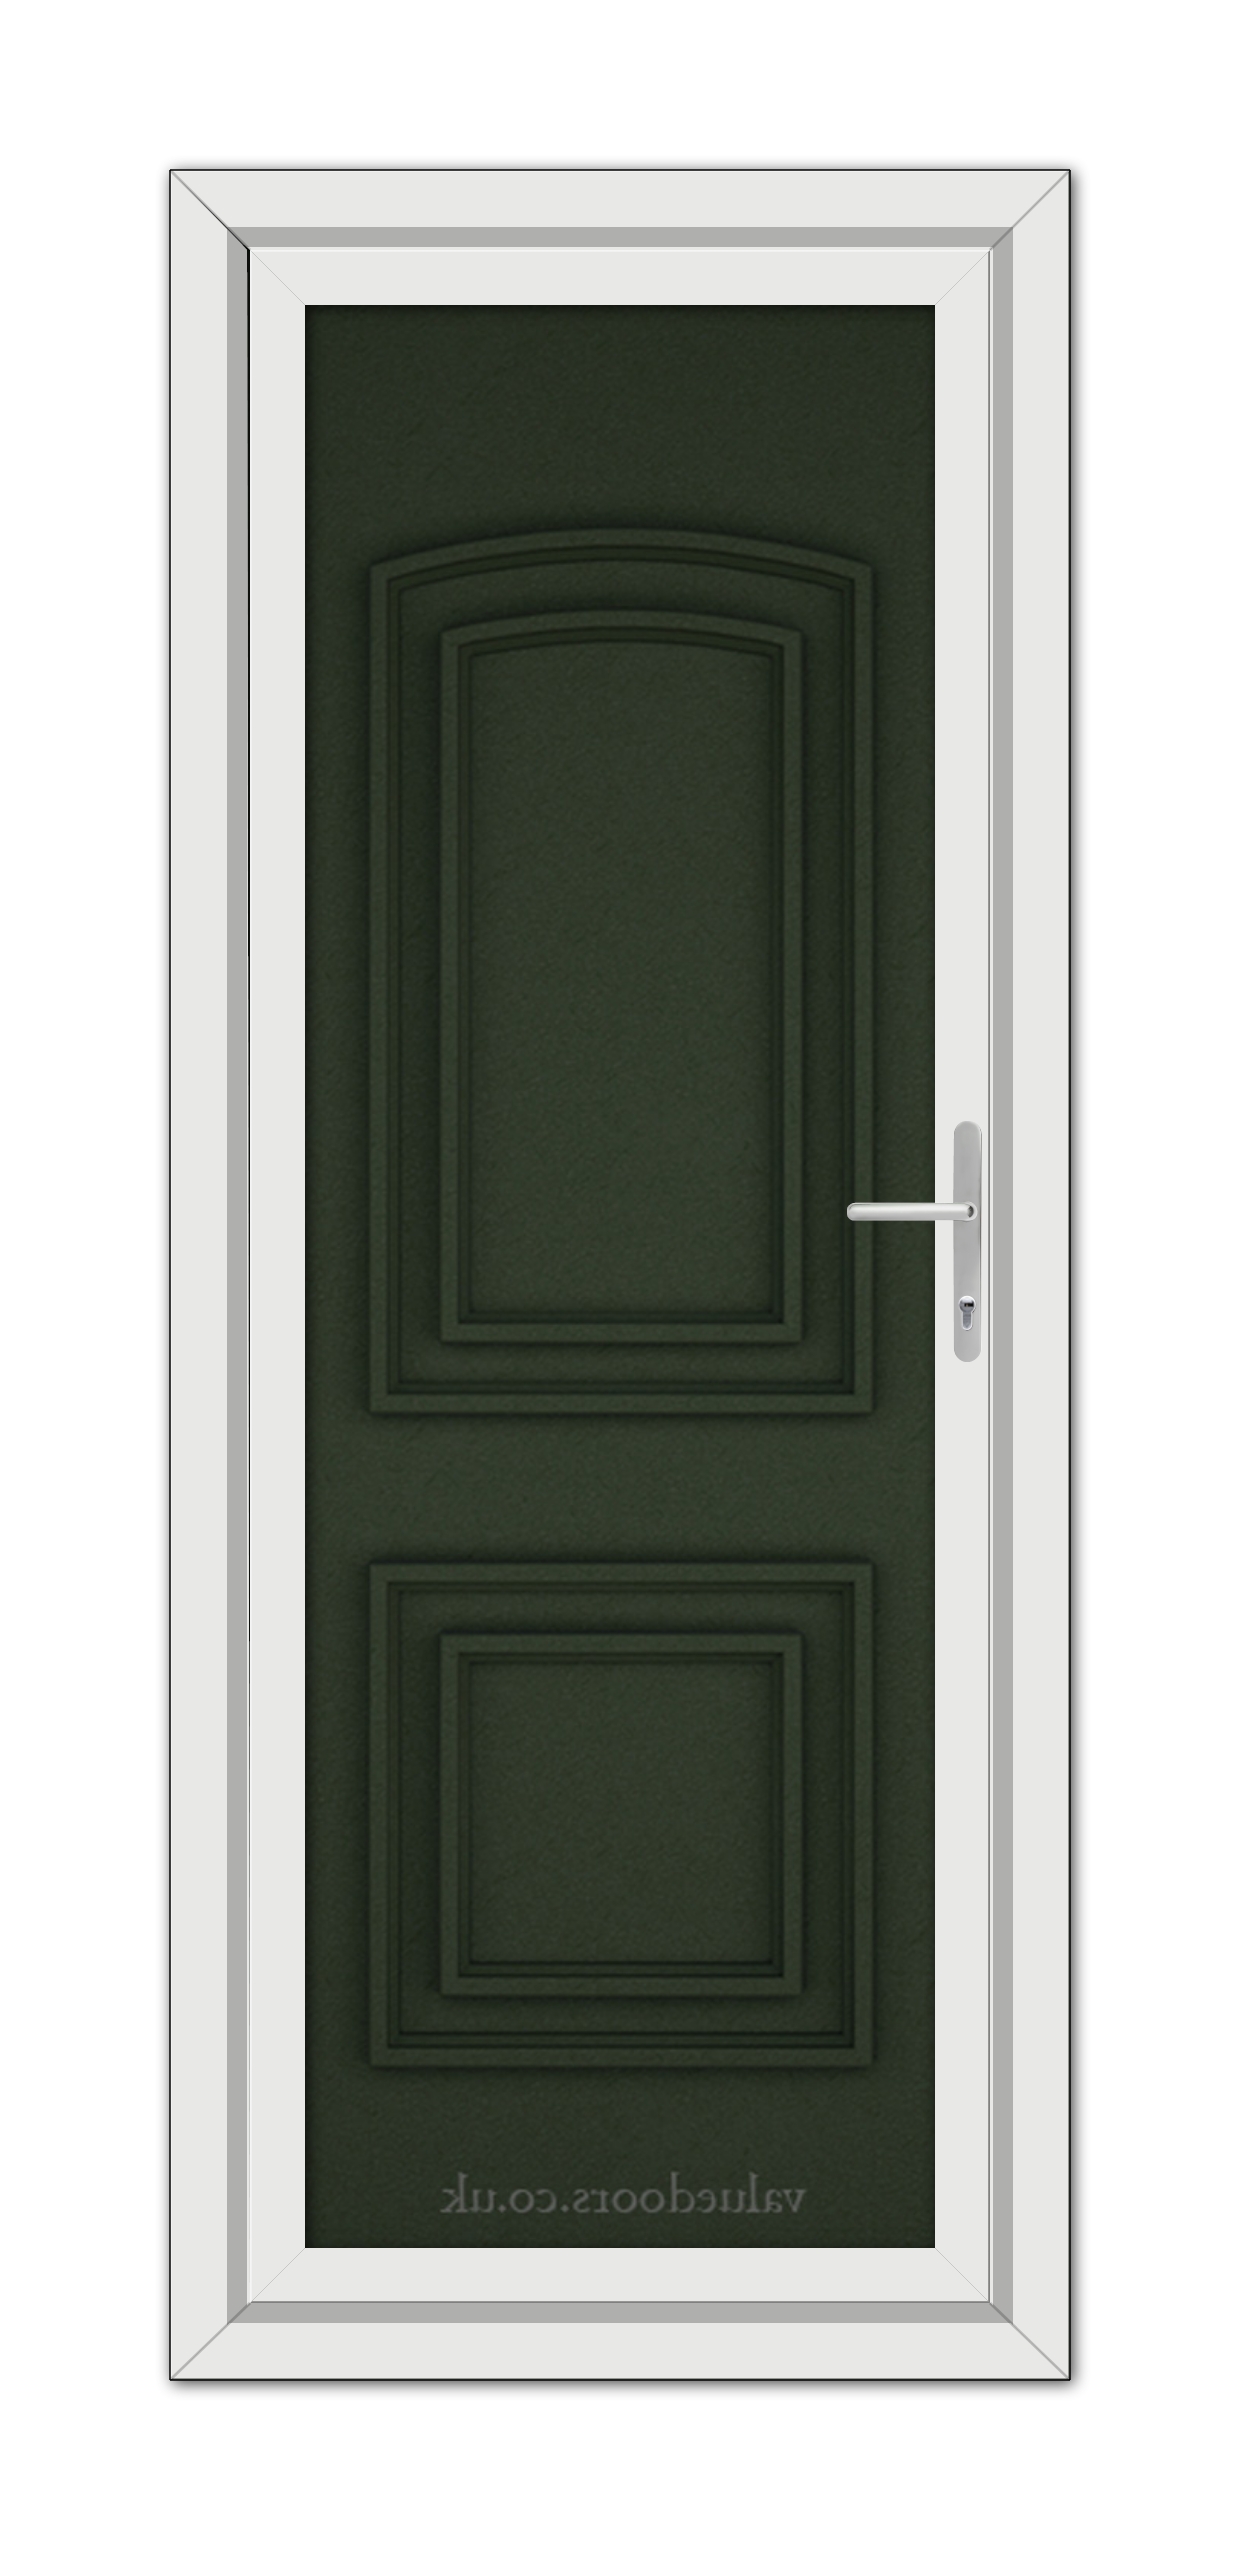 A vertical image of a closed Green Balmoral Solid uPVC Door with a white frame and a metallic handle, set within a light gray wall.